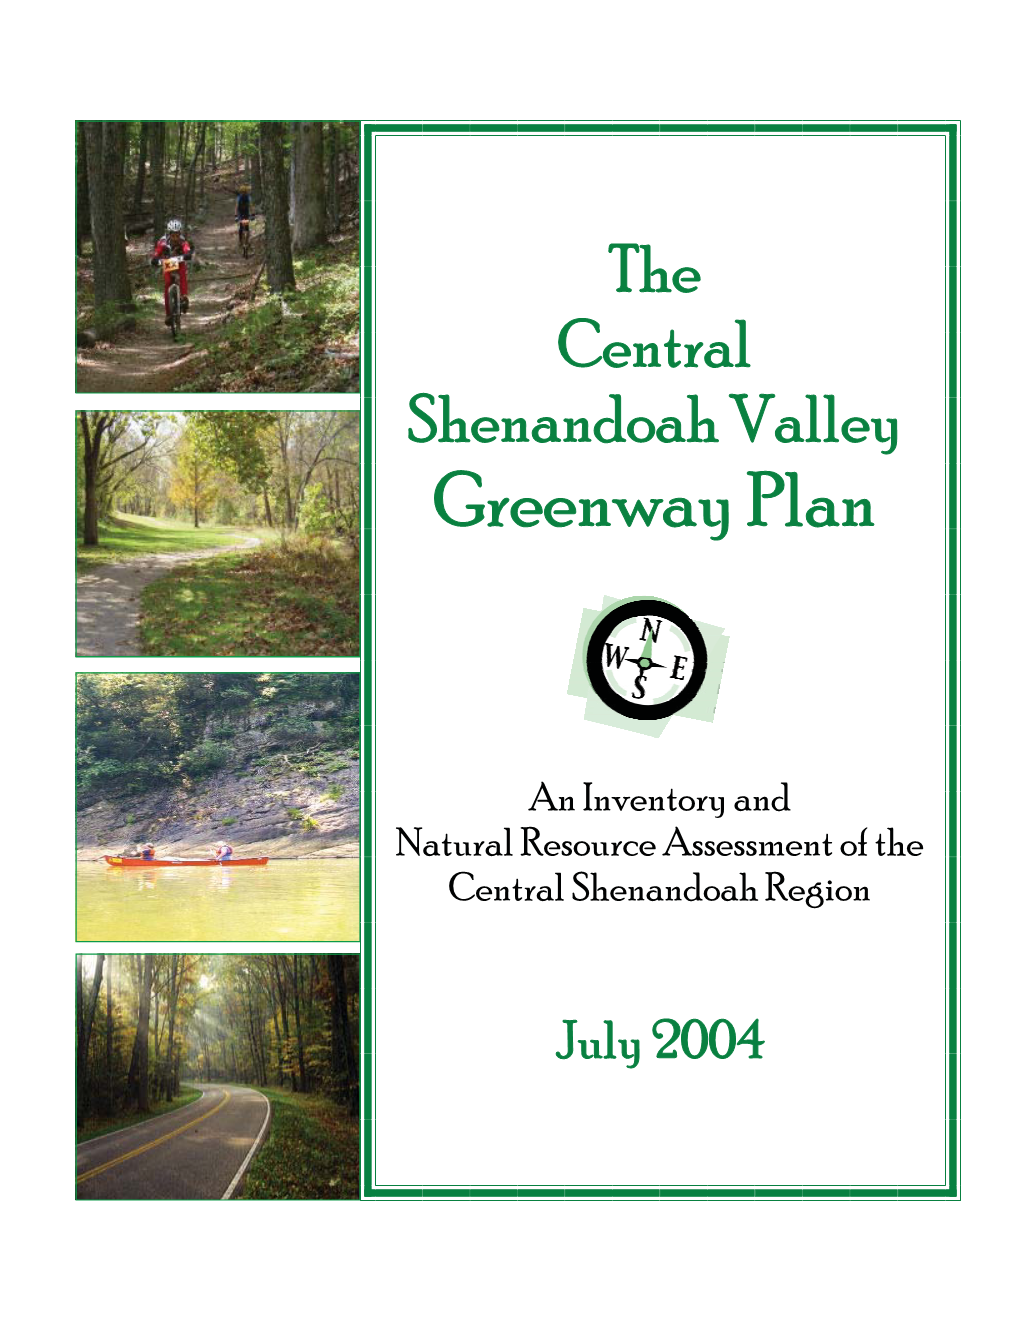 The Central Shenandoah Valley Greenway Plan